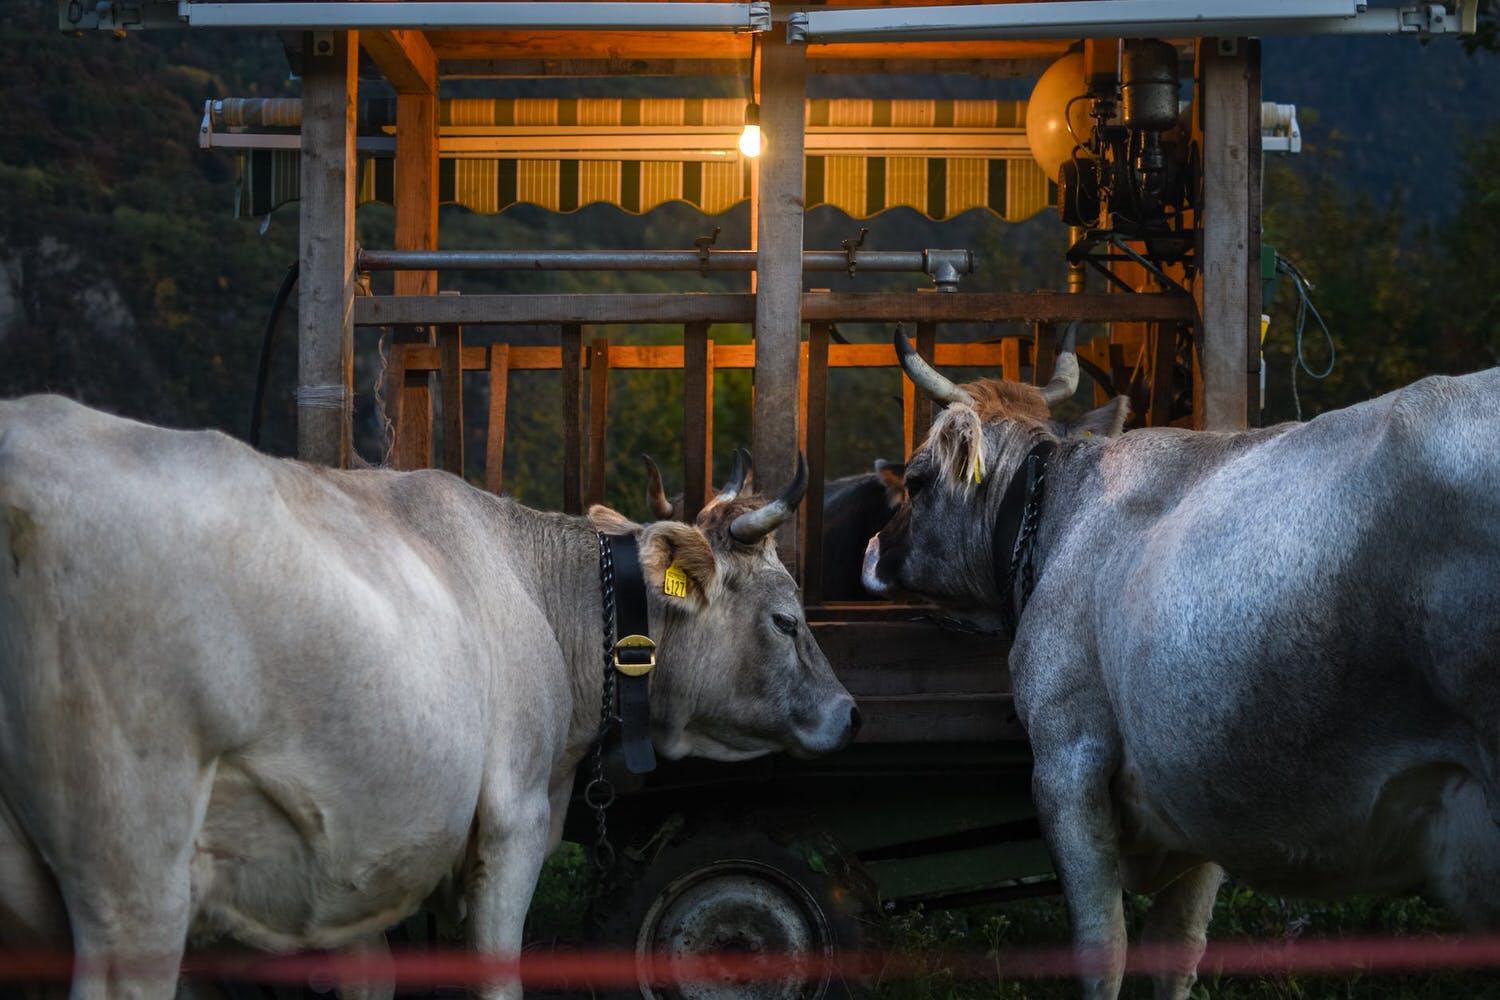 gray cow and brown cow near a wooden carriage